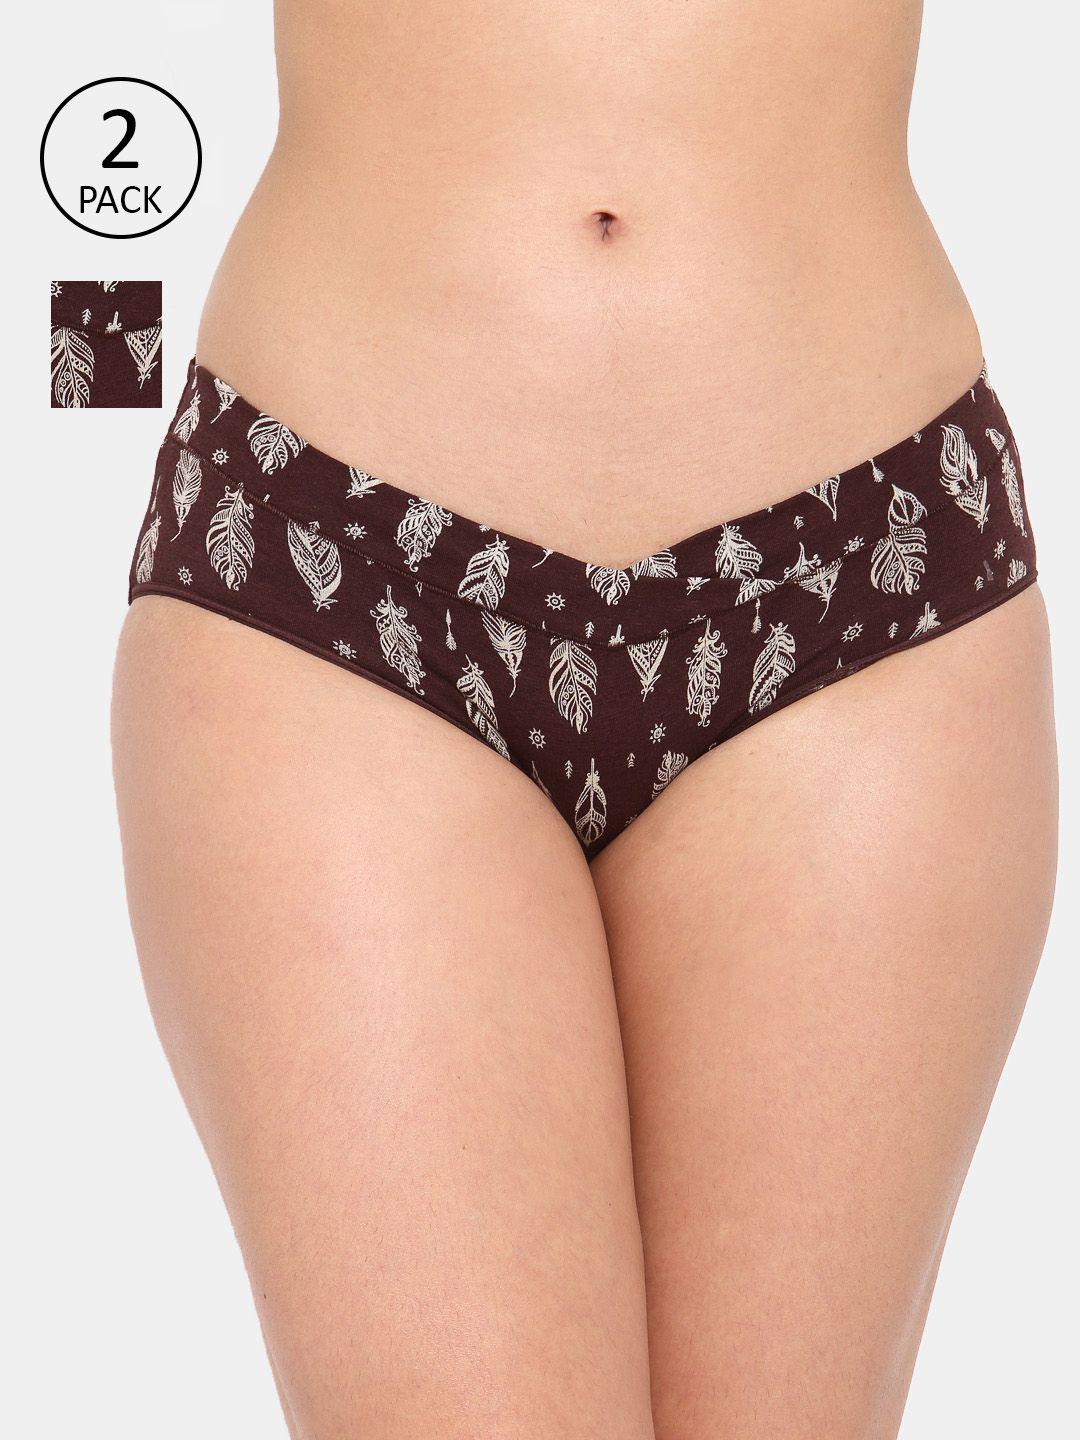 inner-sense-women-pack-of-2-brown-feather-printed-sustainable-organic-cotton-maternity-briefs-imp102